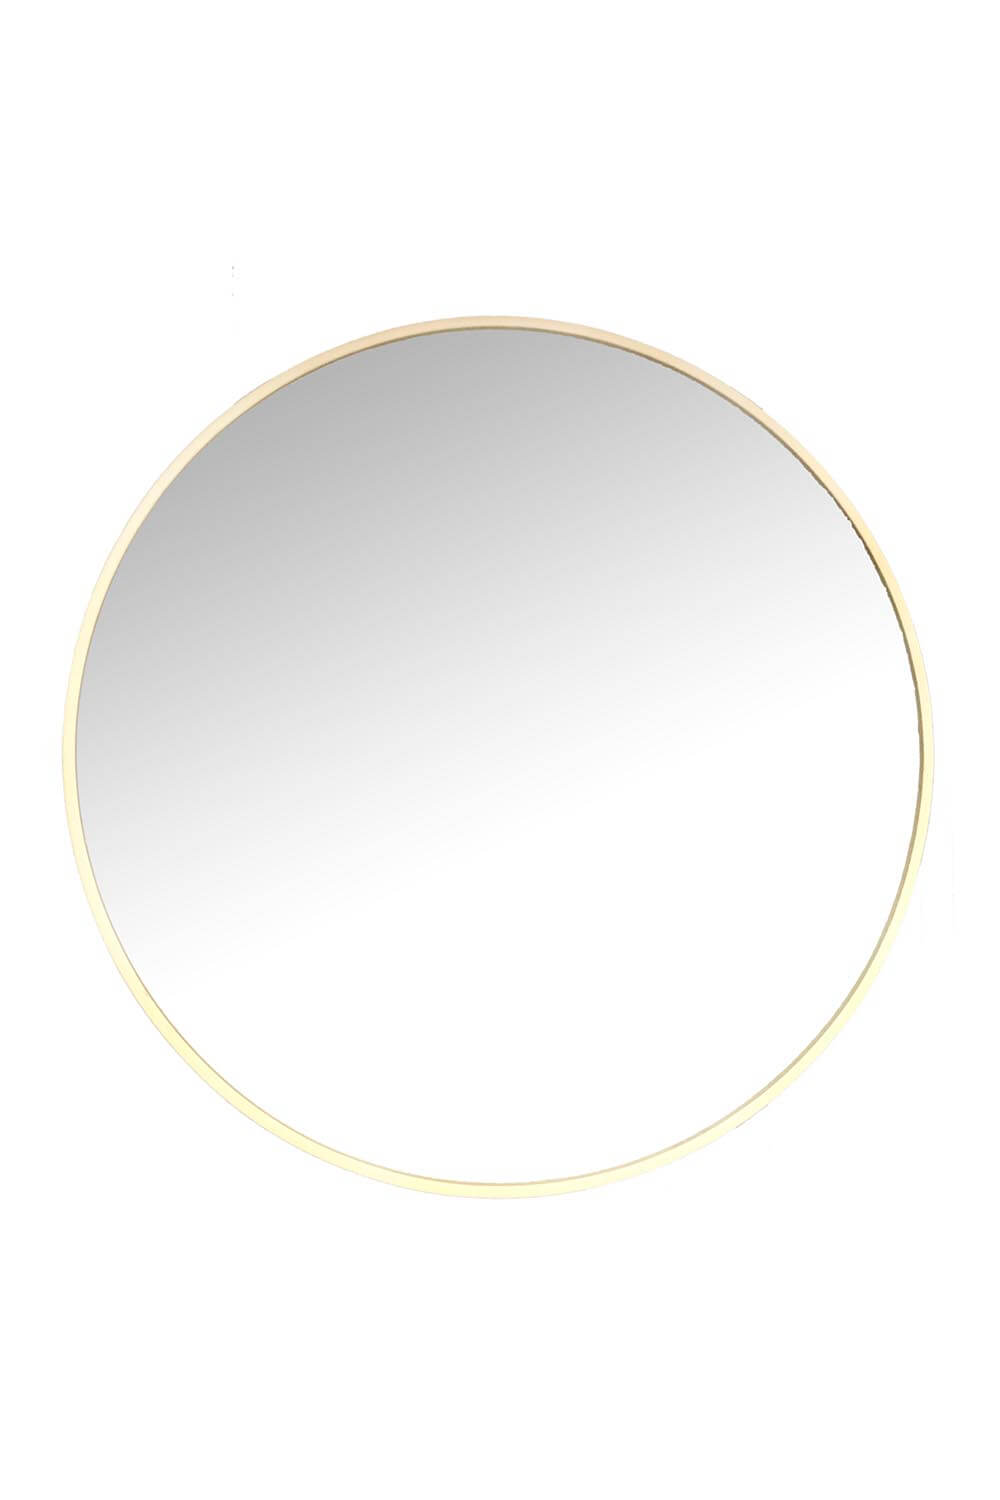 Kirkwood Round Wall Mirror 80cm - Gold 1 Shaws Department Stores